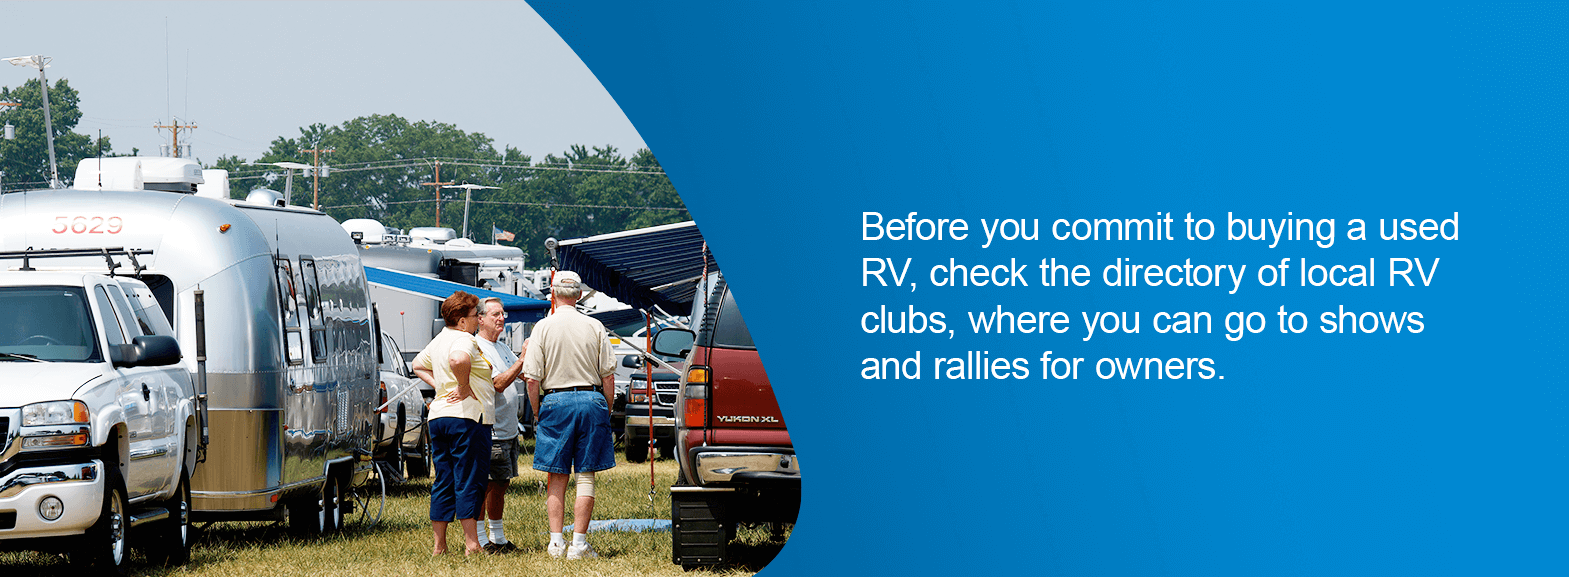 Before you commit to buying a used RV, check the directory of local RV clubs, where you can go to shows and rallies for owners. 